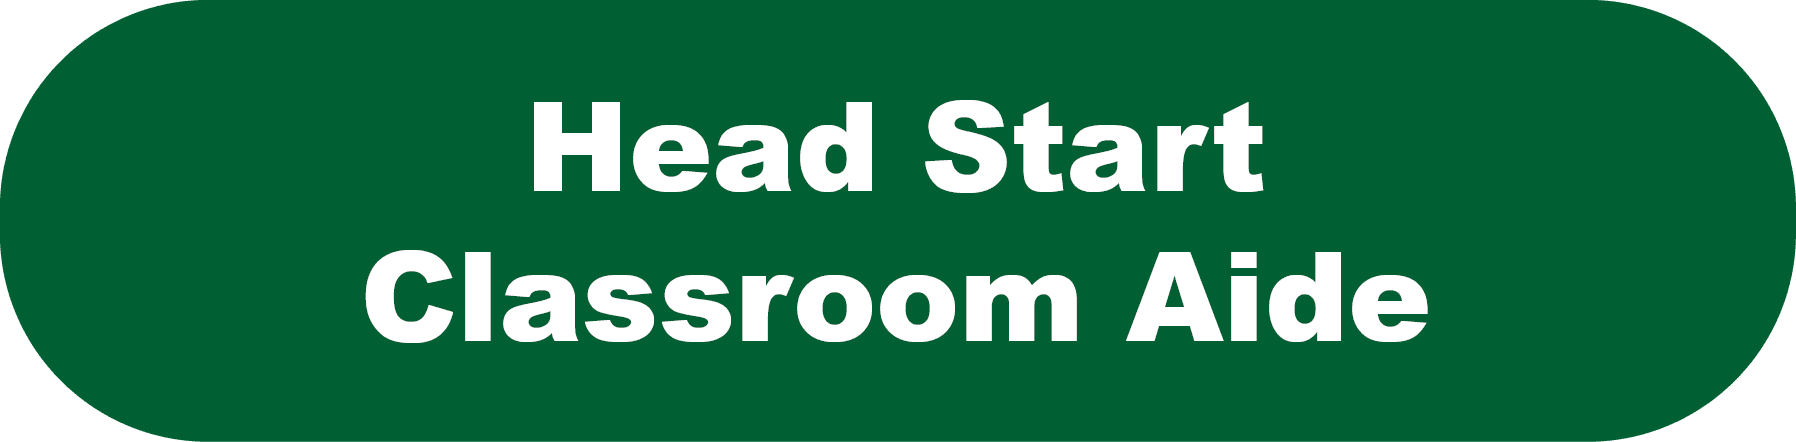 Head Start Classroom Aide (Lycoming County)